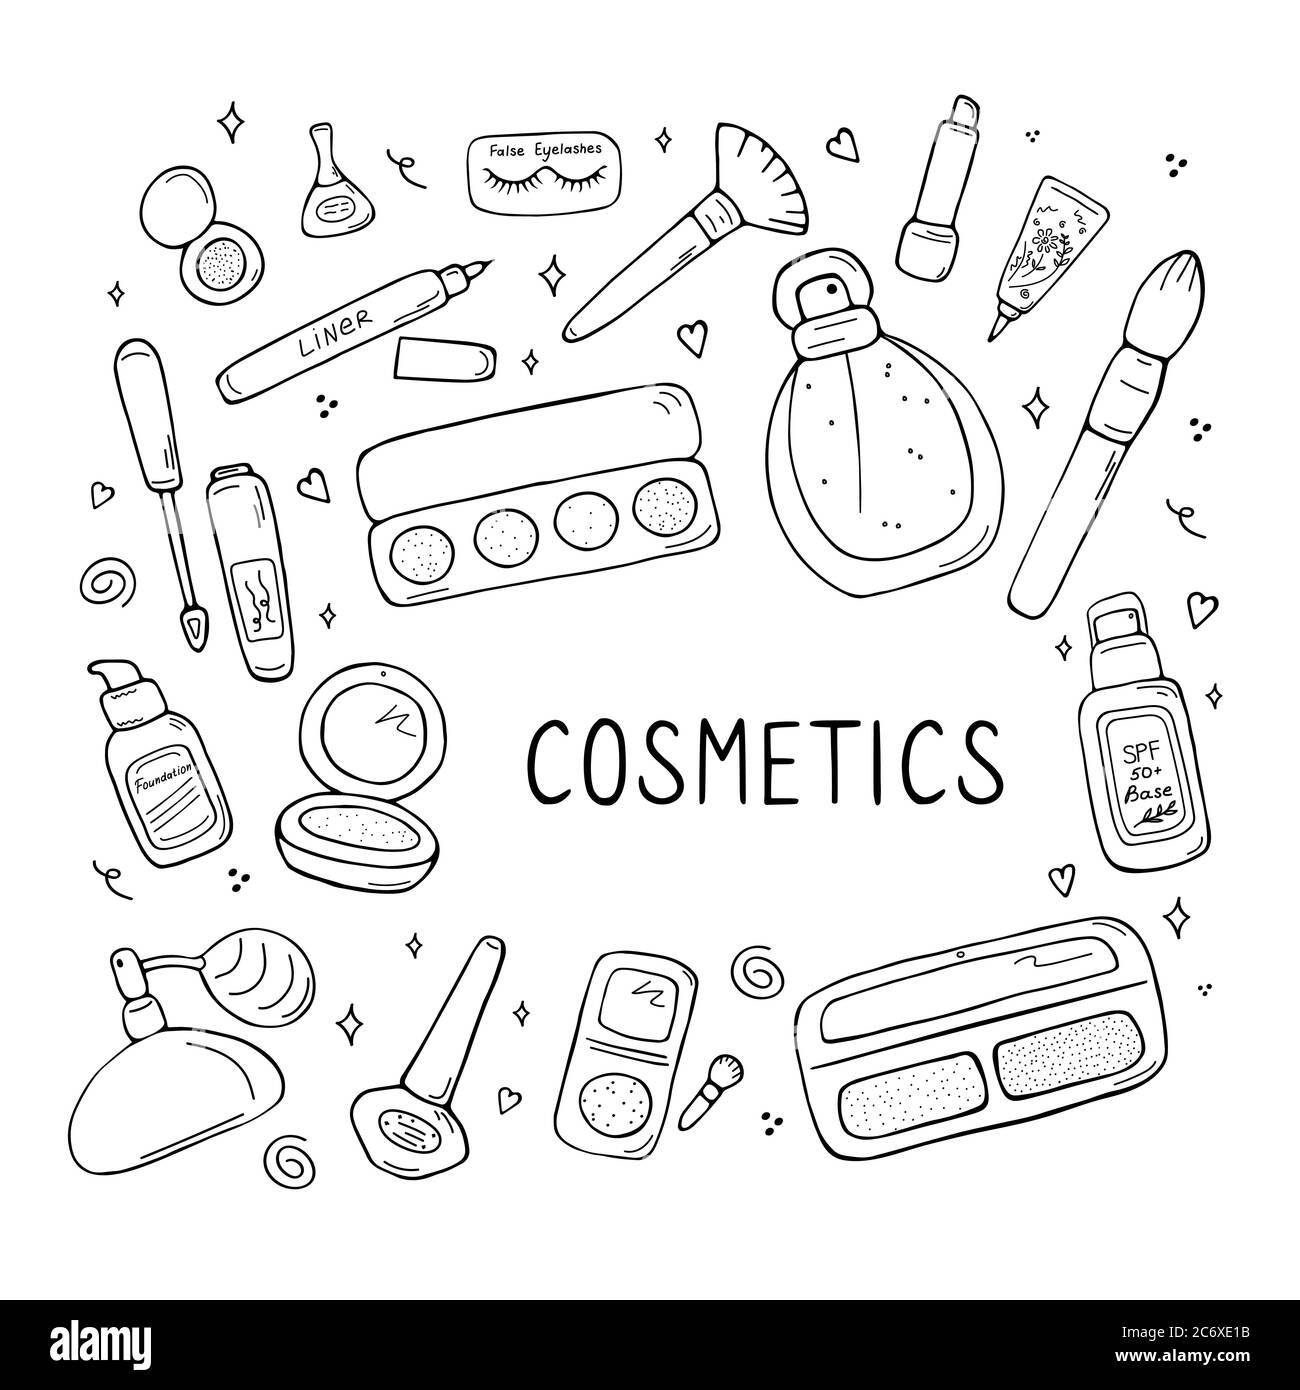 Makeup artist and beauty salon professional kit collection. Beauty sketch background. Illustration of cosmetic and fashion. Hand drawn doodle vector Stock Vector